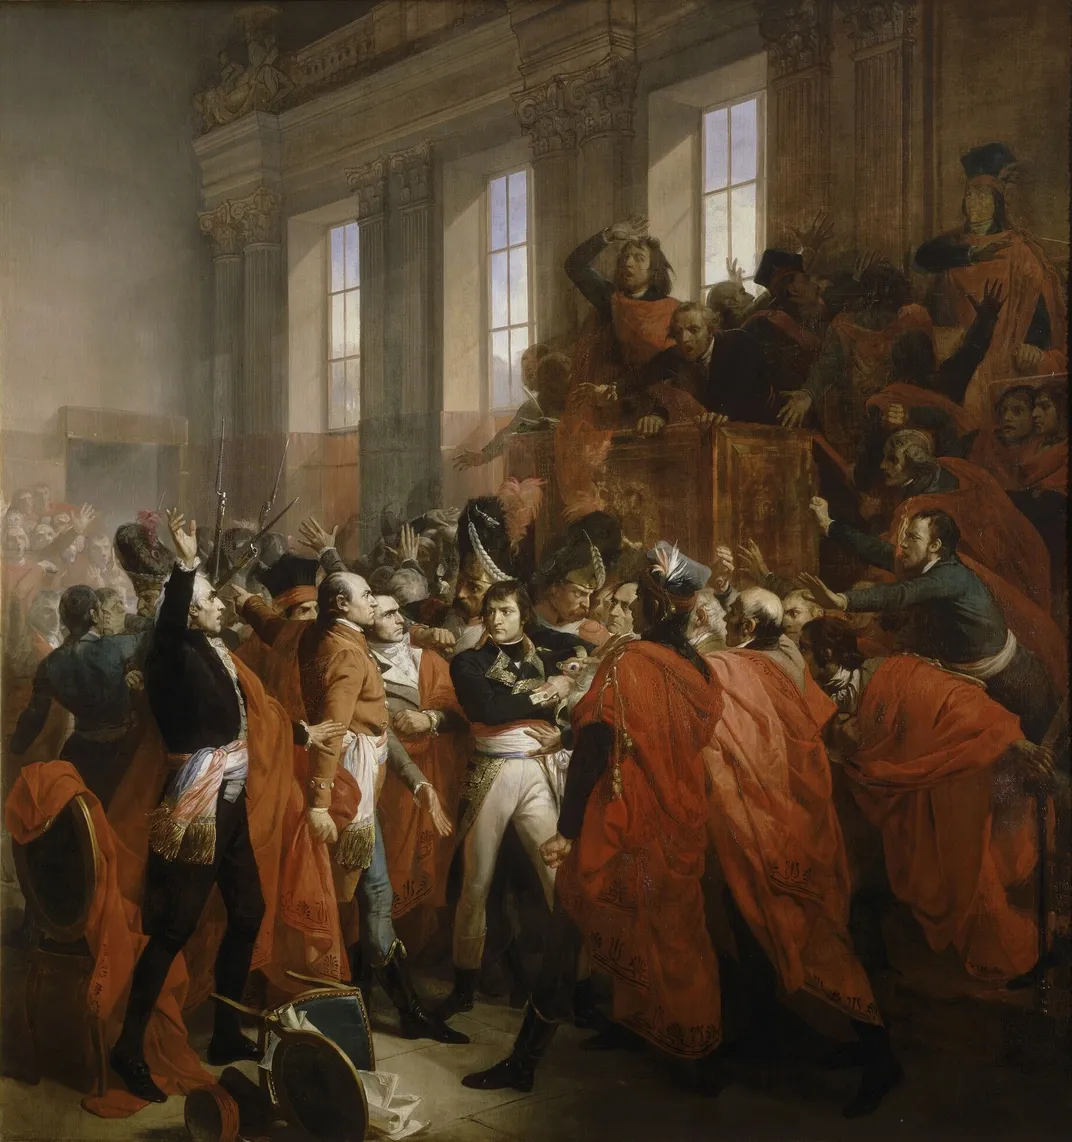 A François Bouchot painting of Napoleon surrounded by members of the Council of Five Hundred during the Coup of 18 Brumaire